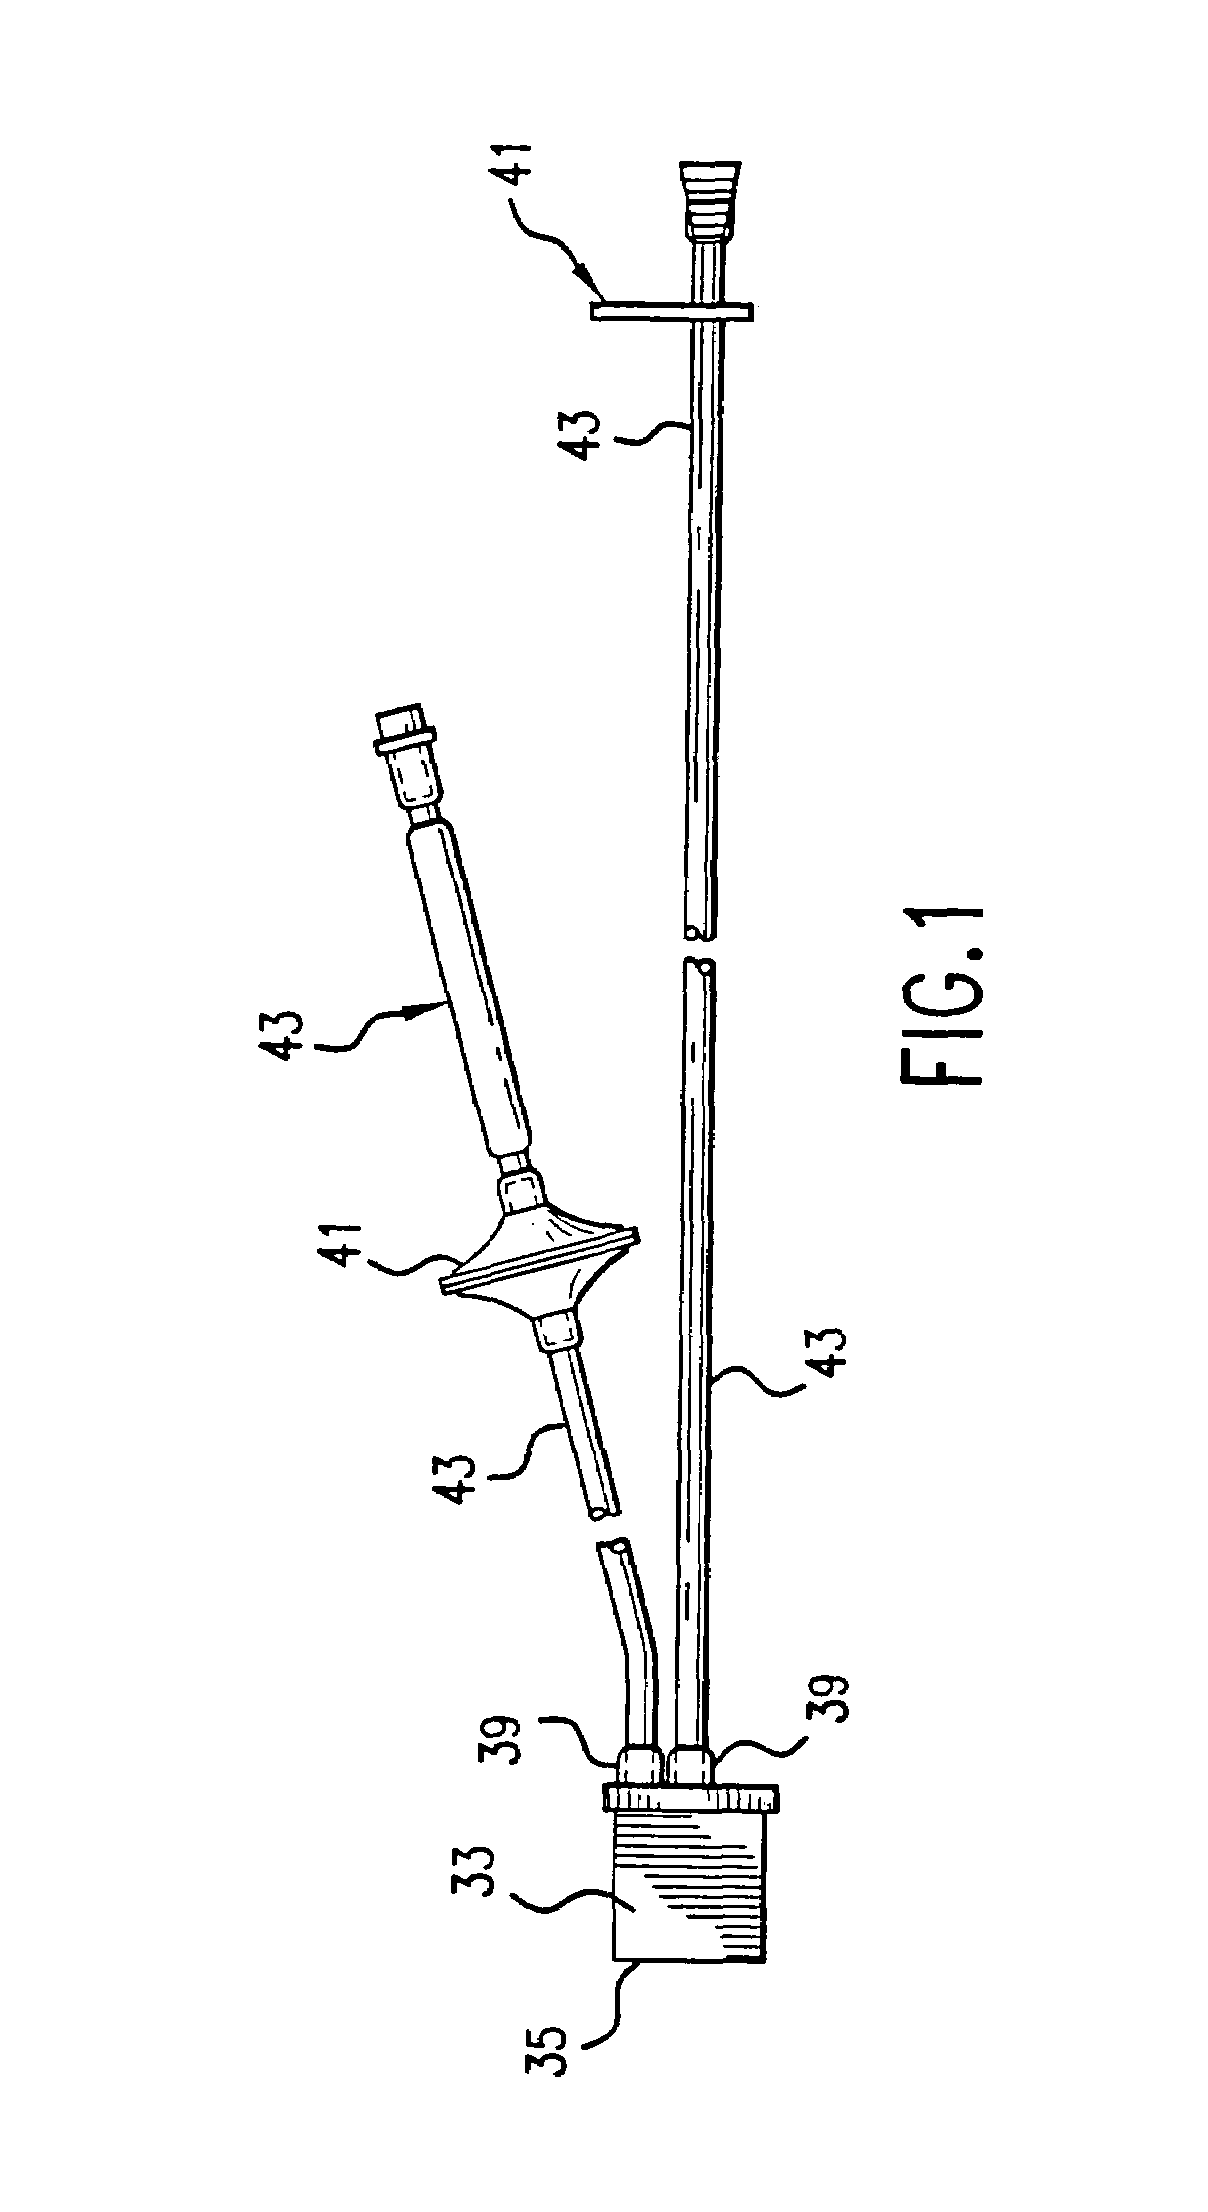 Device, system, kit or method for collecting effluent from an individual